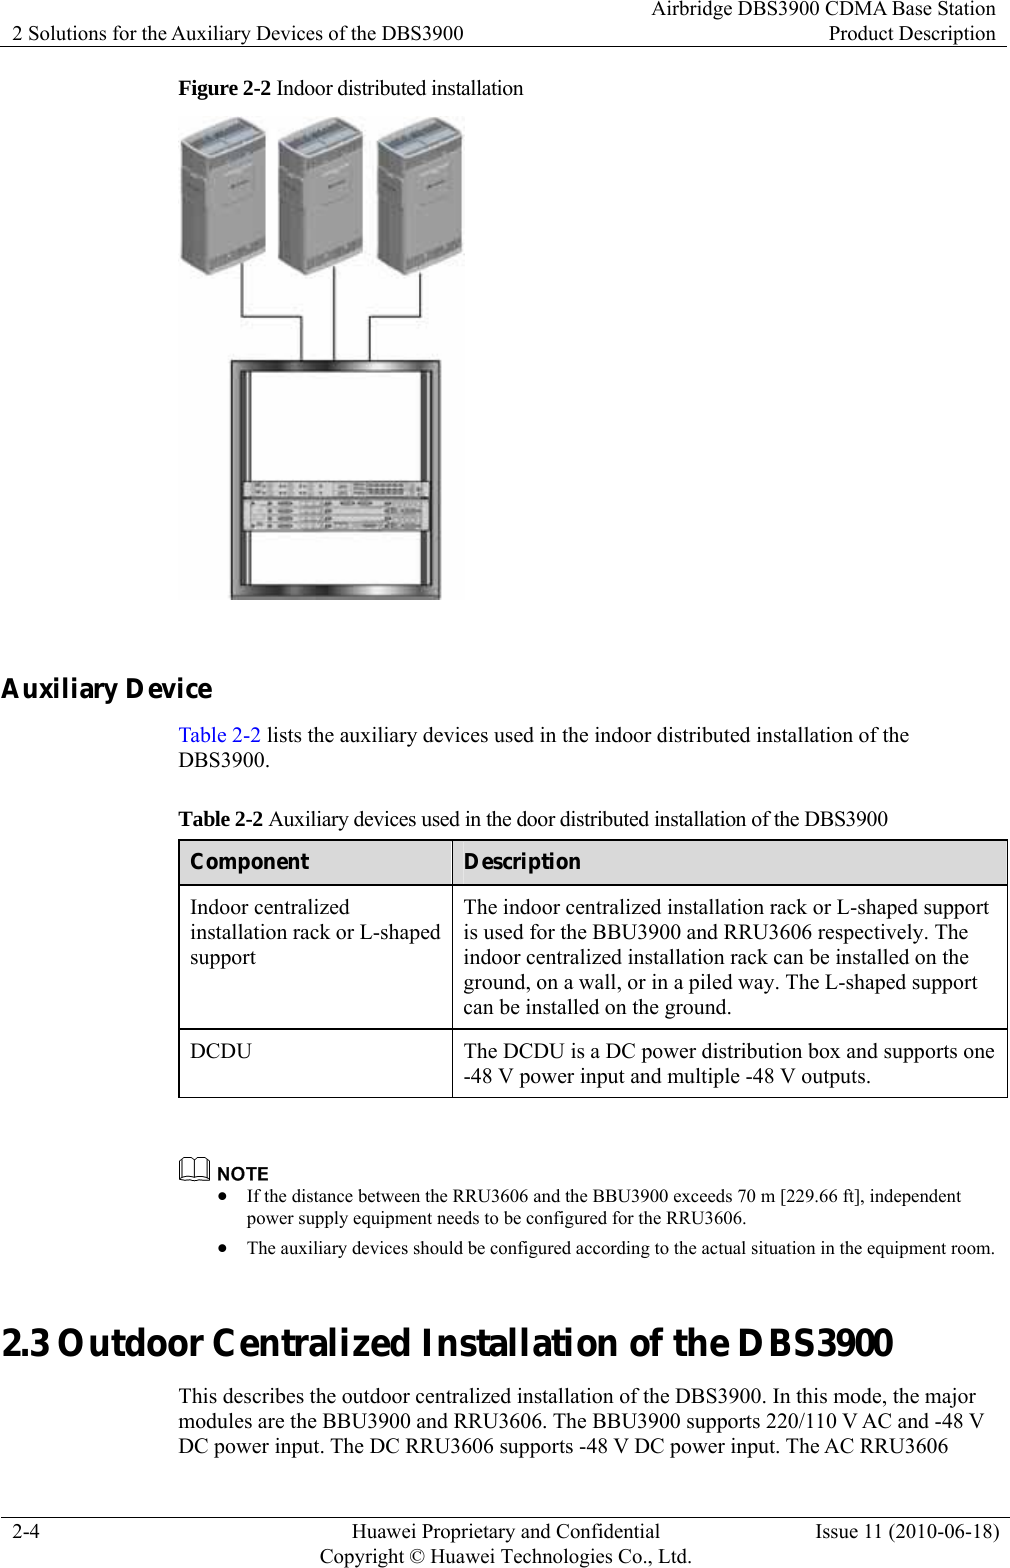 2 Solutions for the Auxiliary Devices of the DBS3900 Airbridge DBS3900 CDMA Base StationProduct Description 2-4  Huawei Proprietary and Confidential     Copyright © Huawei Technologies Co., Ltd.Issue 11 (2010-06-18) Figure 2-2 Indoor distributed installation   Auxiliary Device Table 2-2 lists the auxiliary devices used in the indoor distributed installation of the DBS3900. Table 2-2 Auxiliary devices used in the door distributed installation of the DBS3900 Component  Description Indoor centralized installation rack or L-shaped support The indoor centralized installation rack or L-shaped support is used for the BBU3900 and RRU3606 respectively. The indoor centralized installation rack can be installed on the ground, on a wall, or in a piled way. The L-shaped support can be installed on the ground. DCDU  The DCDU is a DC power distribution box and supports one -48 V power input and multiple -48 V outputs.   z If the distance between the RRU3606 and the BBU3900 exceeds 70 m [229.66 ft], independent power supply equipment needs to be configured for the RRU3606. z The auxiliary devices should be configured according to the actual situation in the equipment room. 2.3 Outdoor Centralized Installation of the DBS3900 This describes the outdoor centralized installation of the DBS3900. In this mode, the major modules are the BBU3900 and RRU3606. The BBU3900 supports 220/110 V AC and -48 V DC power input. The DC RRU3606 supports -48 V DC power input. The AC RRU3606 